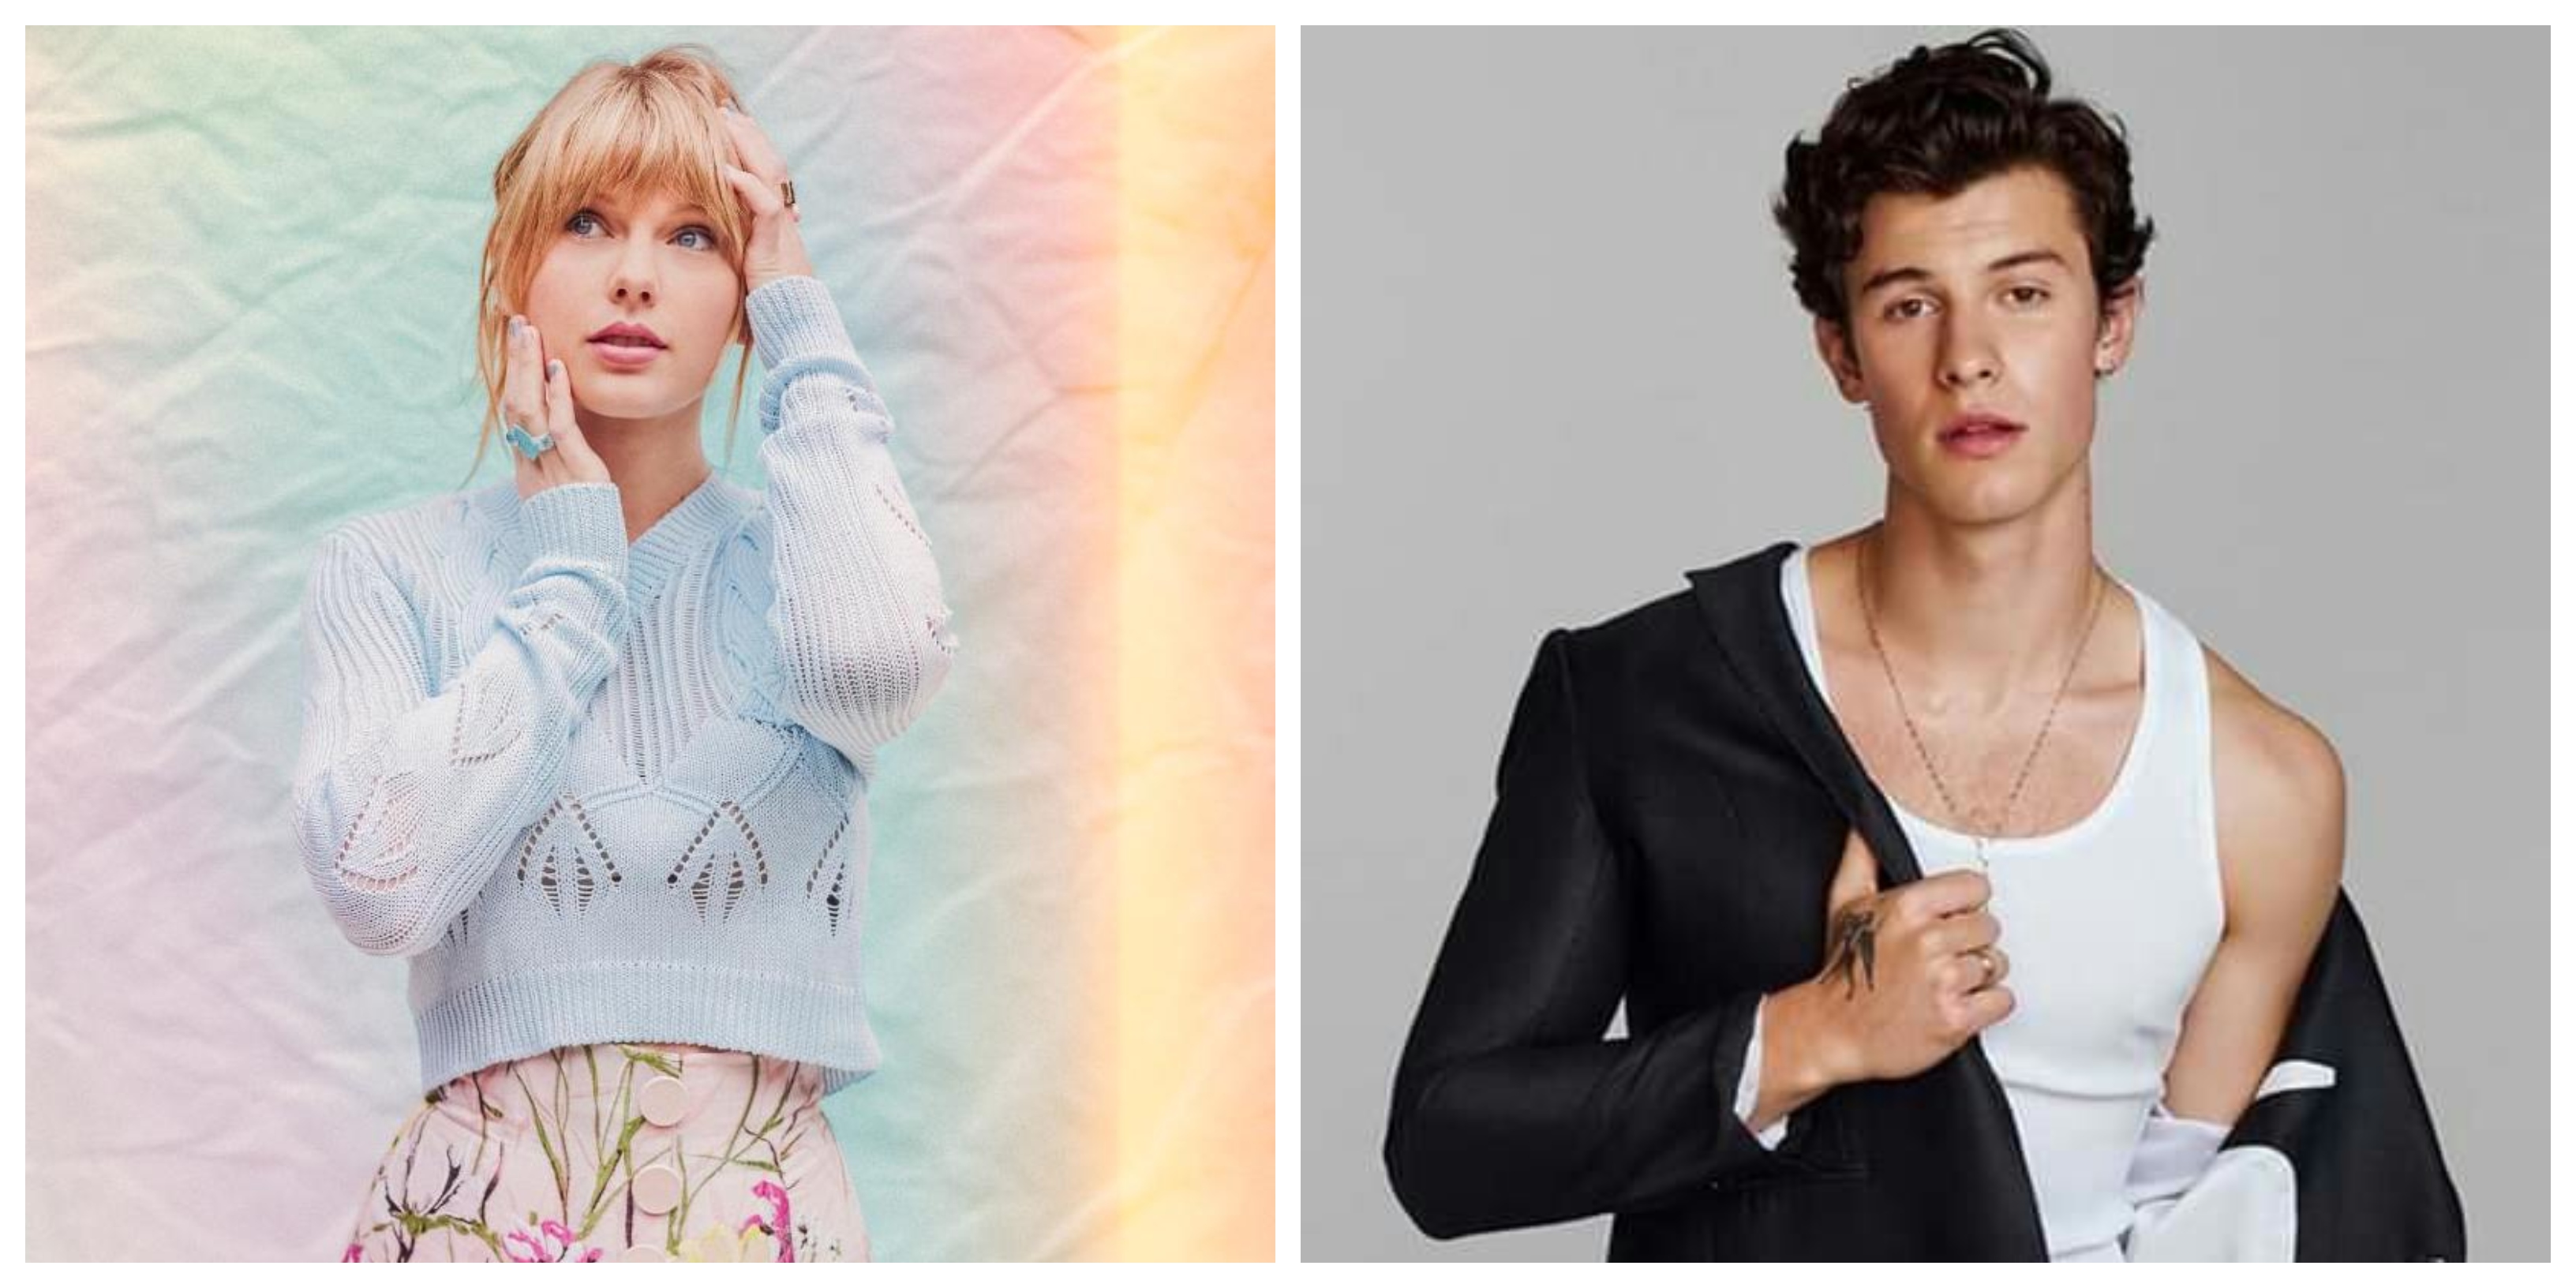 Taylor Swift Surprises With Lover Remix Featuring Shawn